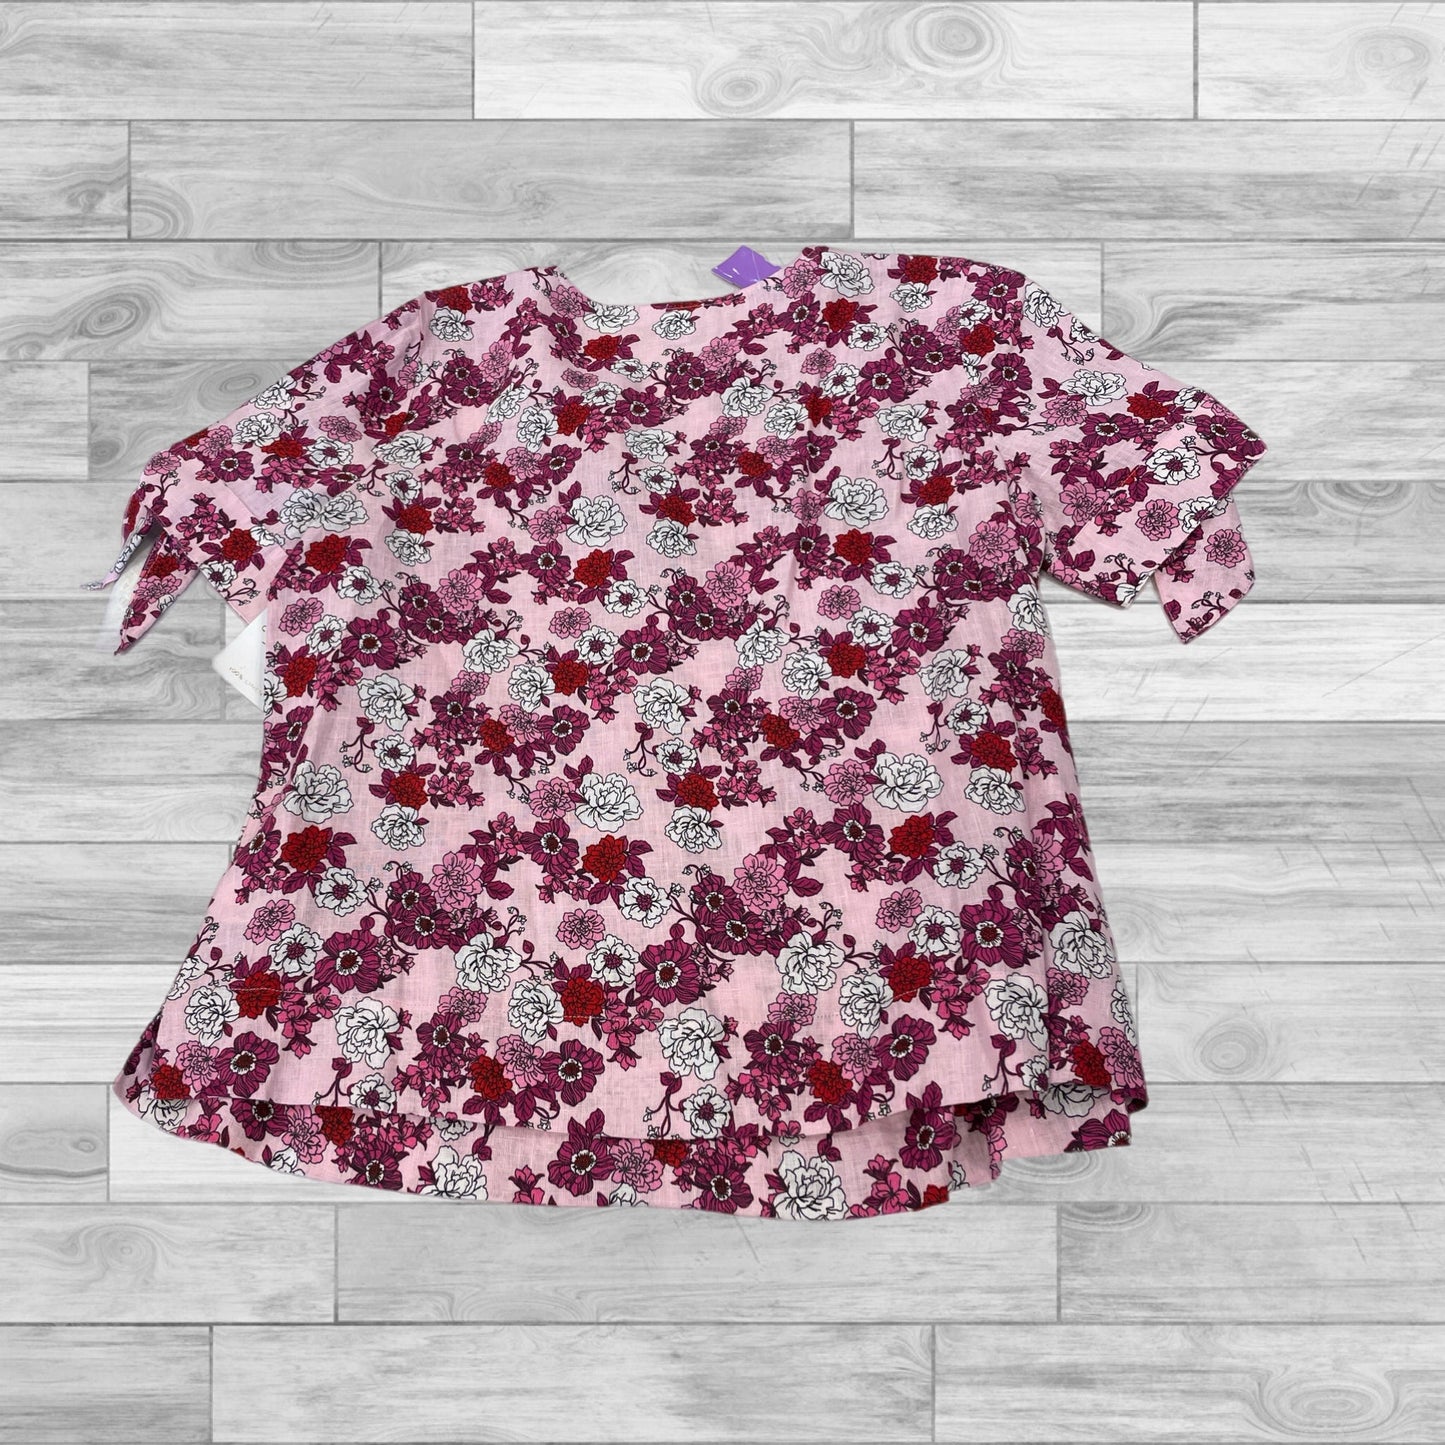 Floral Print Top Short Sleeve Charter Club, Size L